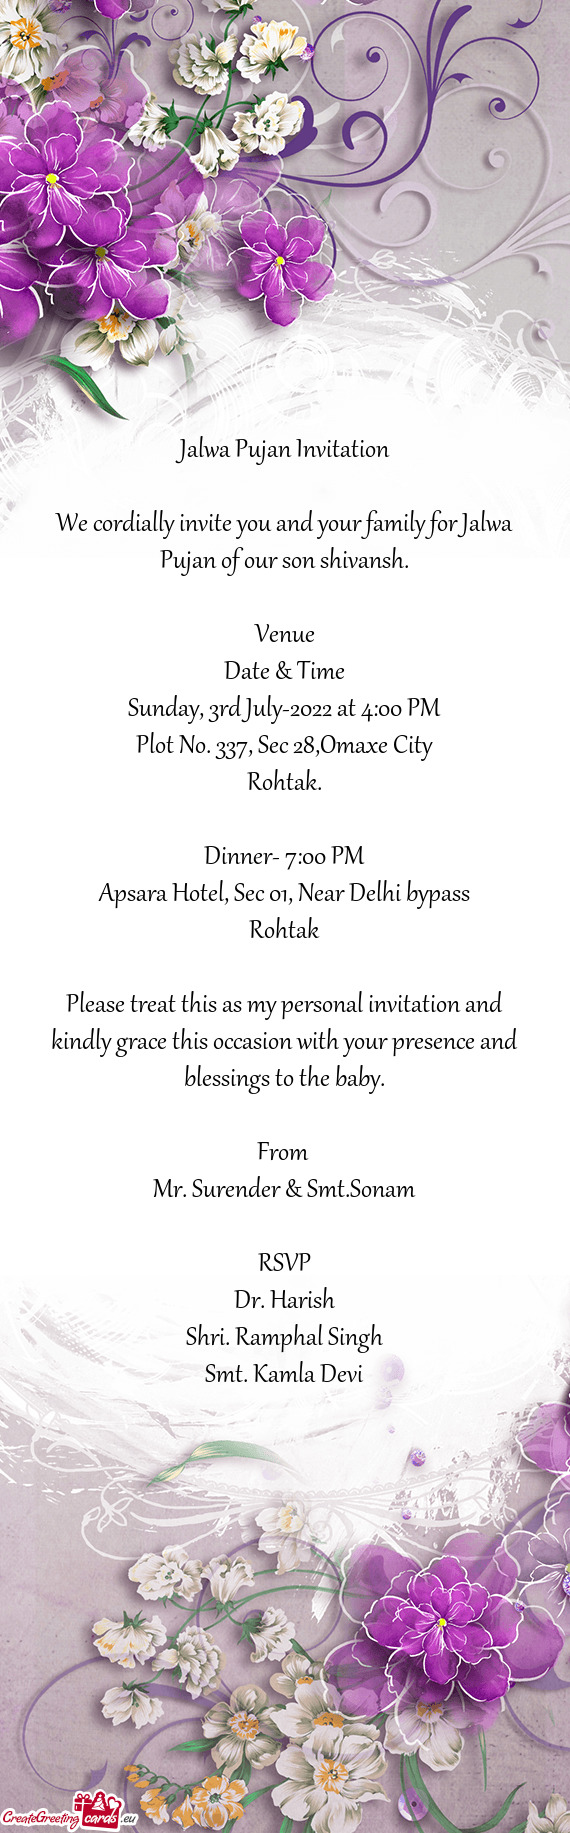 We cordially invite you and your family for Jalwa Pujan of our son shivansh